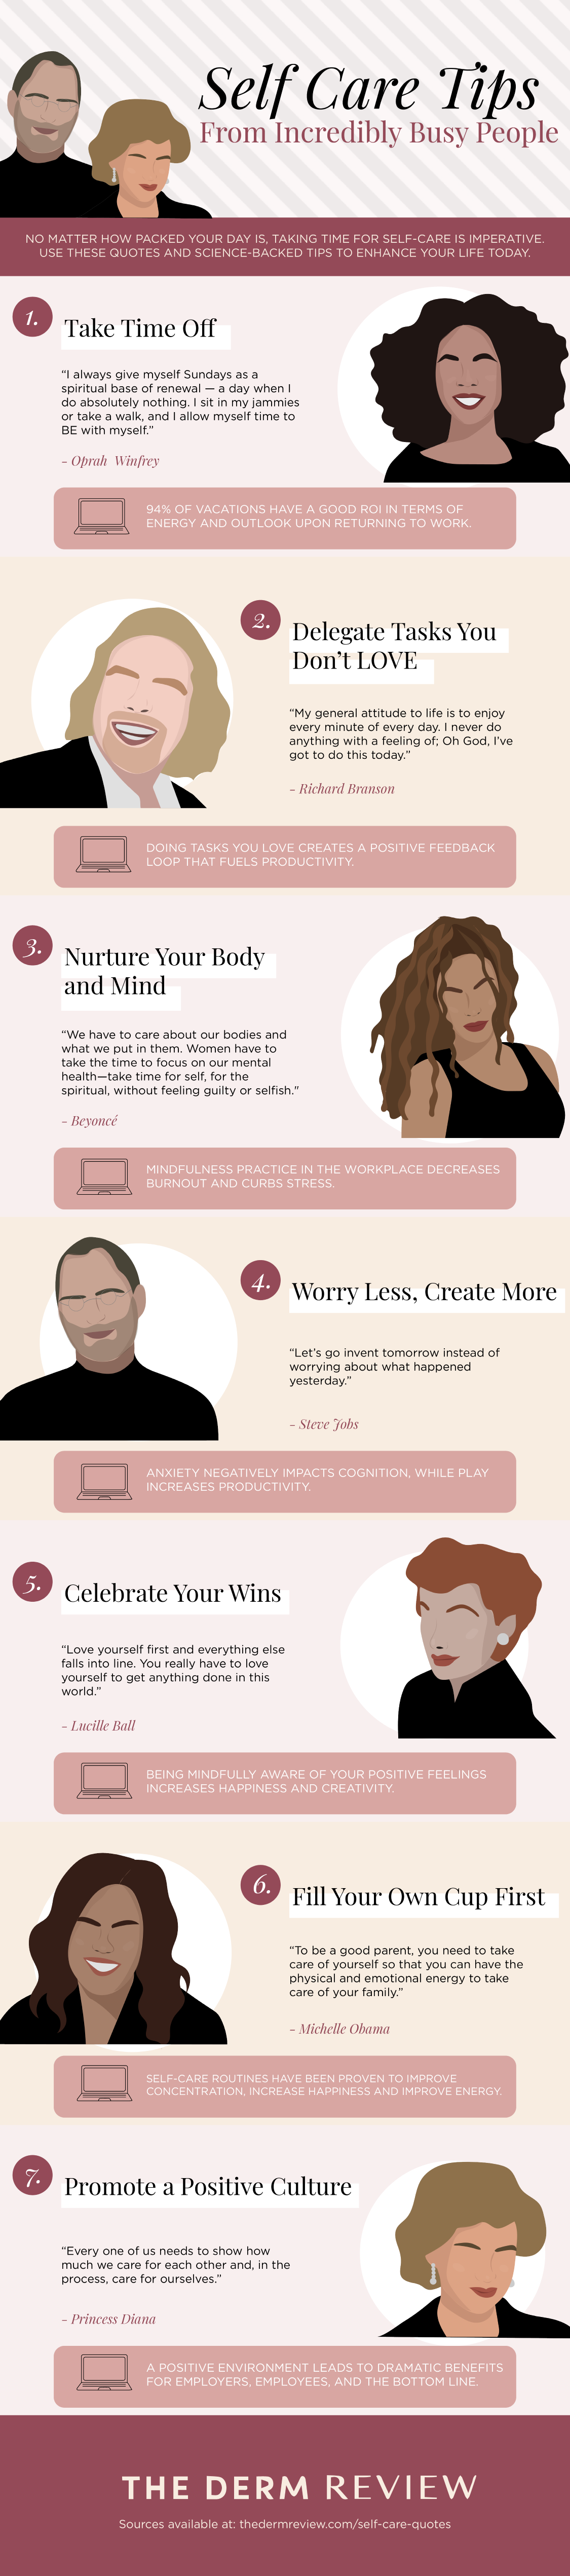 Self-care Quotes From Amazingly Busy People - Infographic